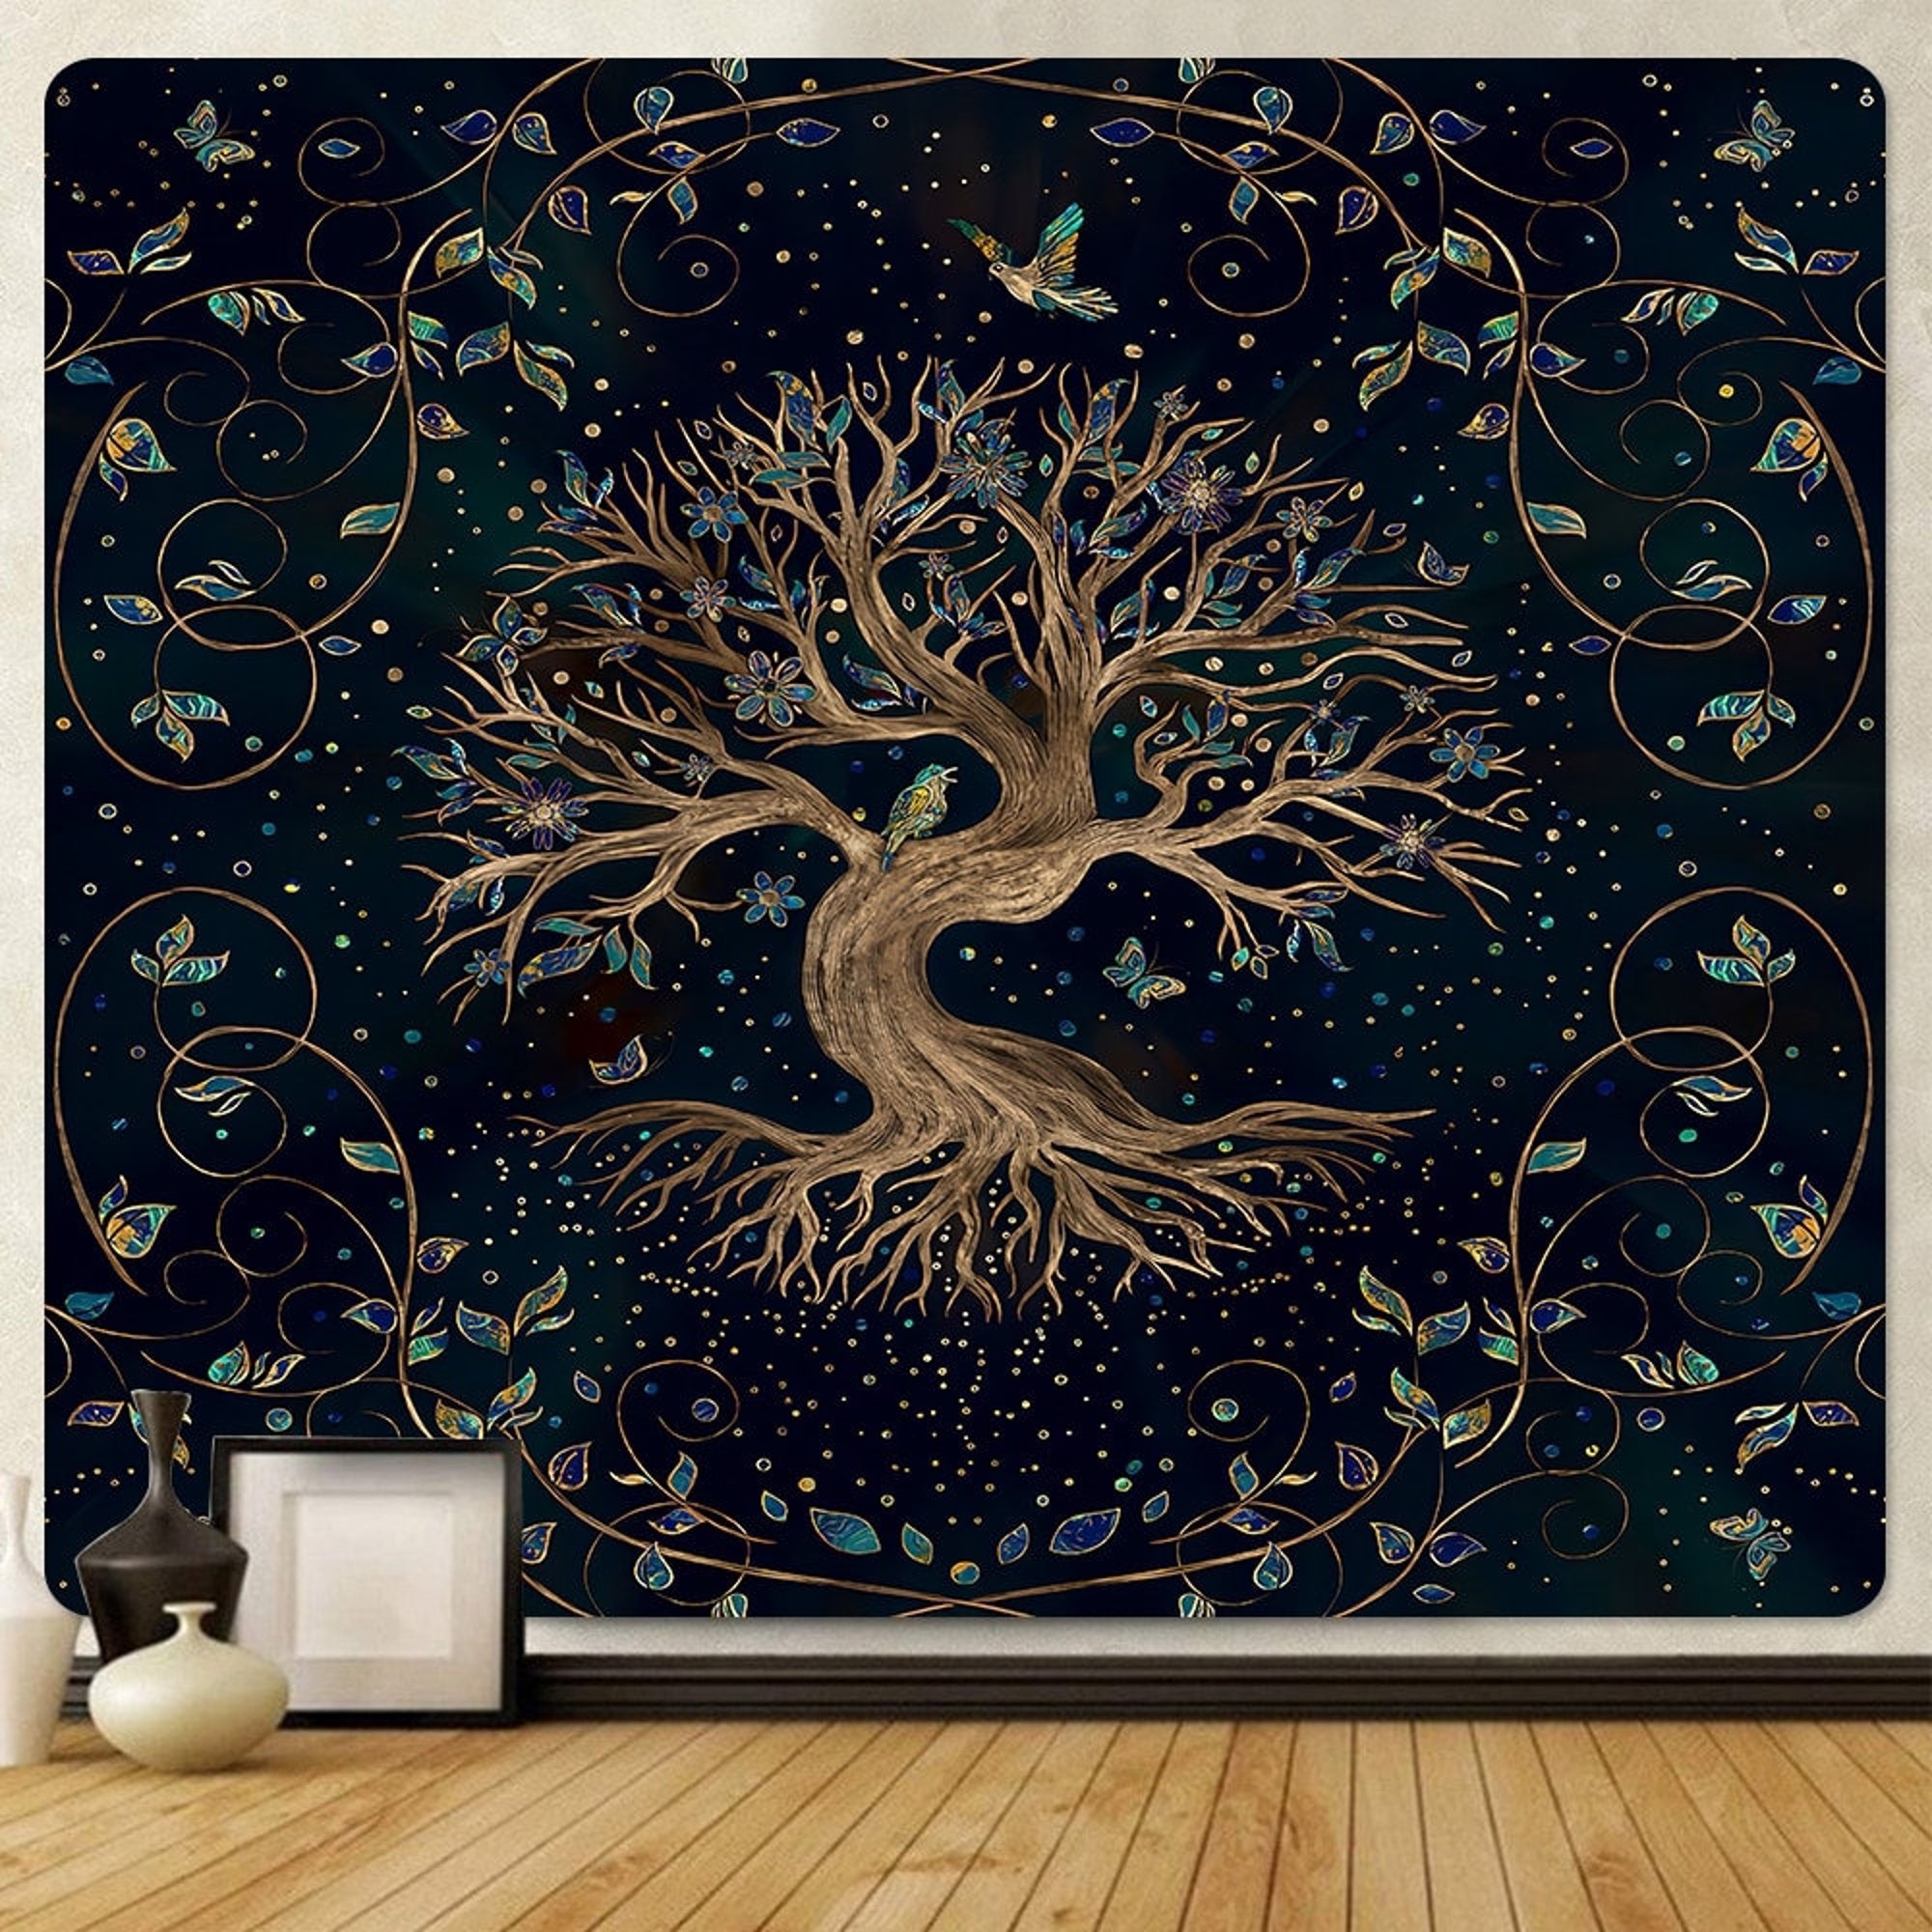 Tree of Life Tapestry Wall Hanging Decor Tapestries for Room